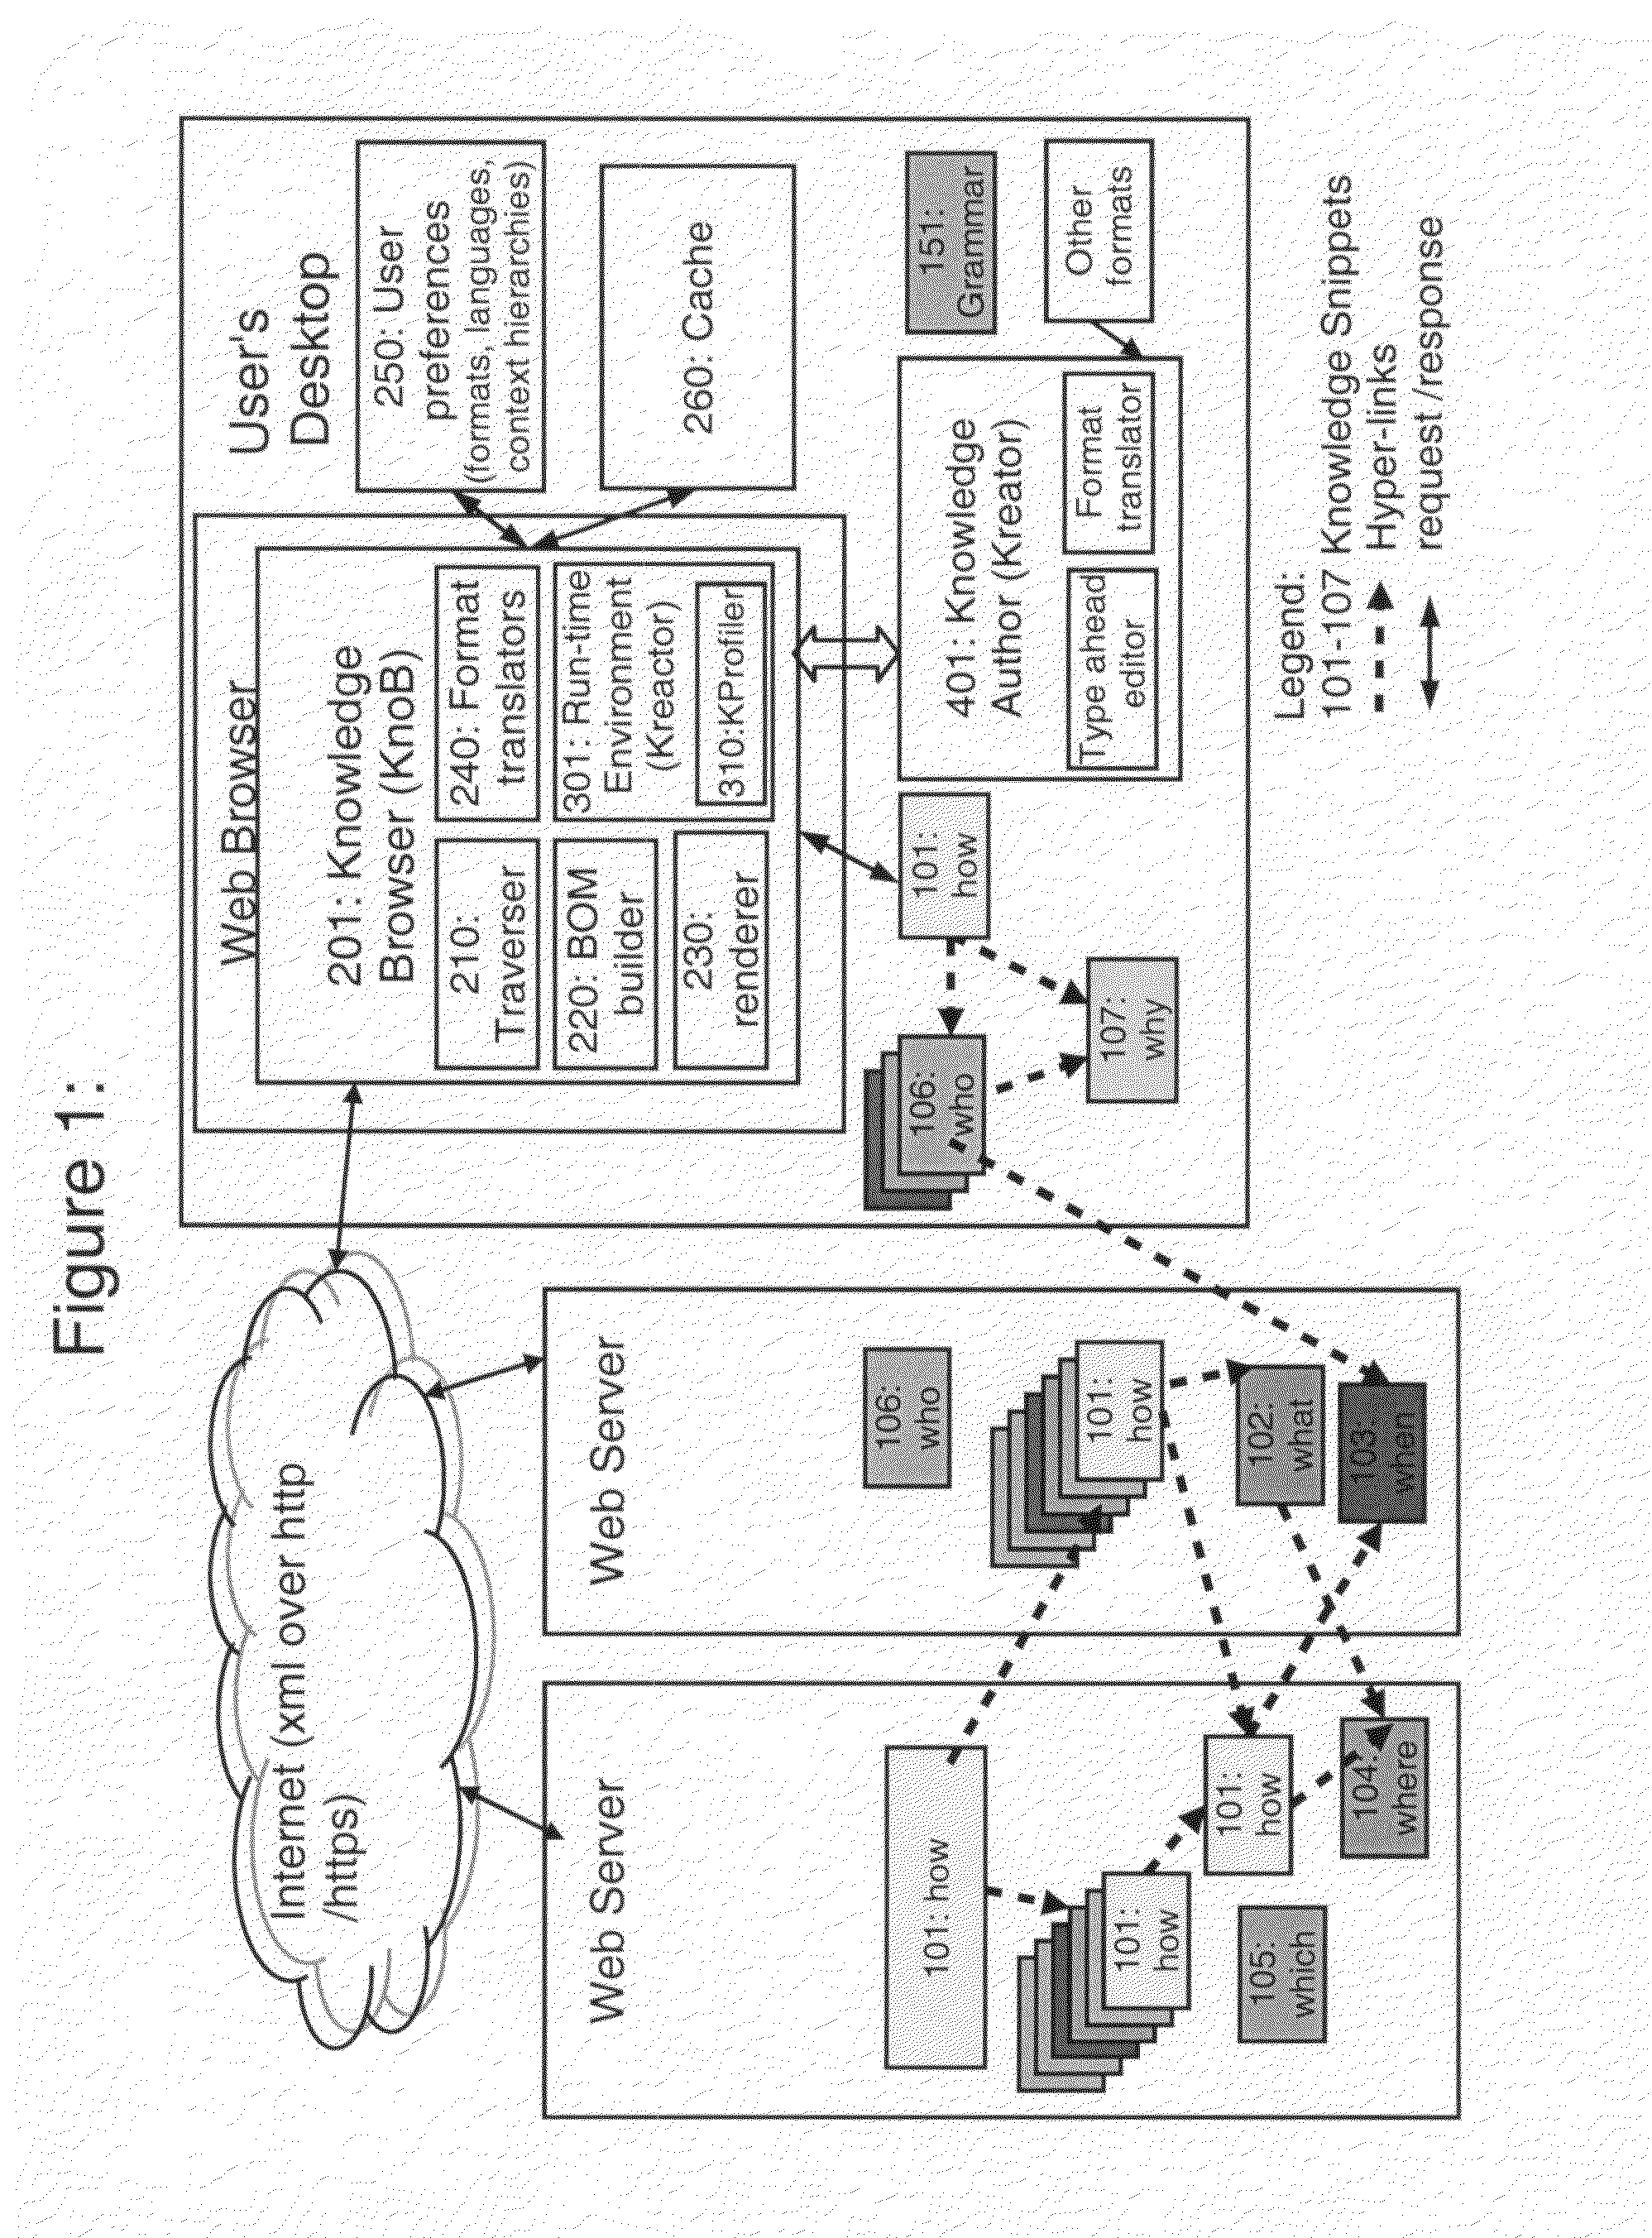 Computer knowledge representation format, system, methods, and applications